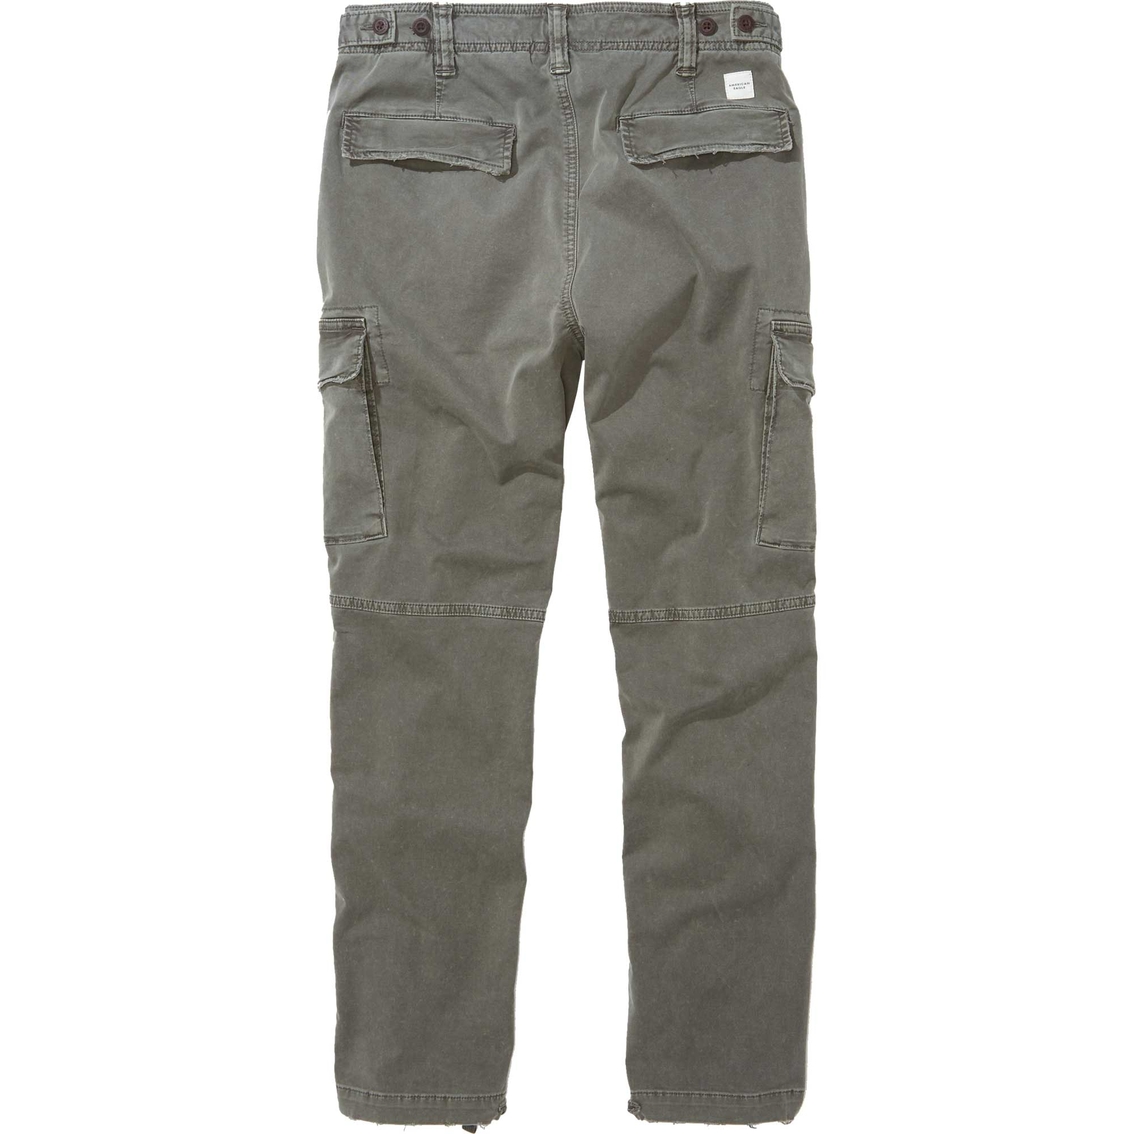 American Eagle Flex Slim Lived In Cargo Pants | Pants | Clothing ...